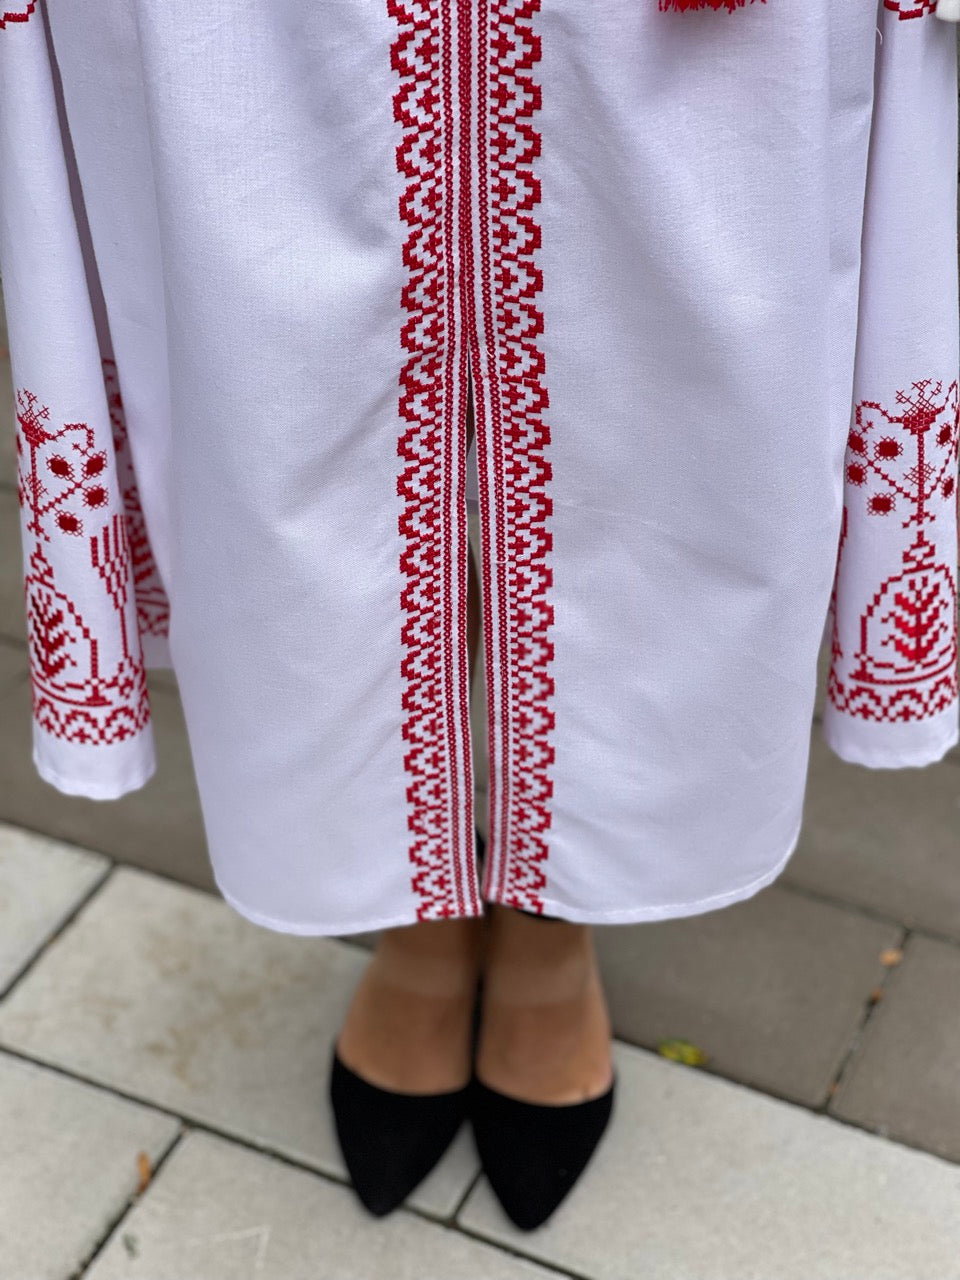 The White Dress with Red Embroidery